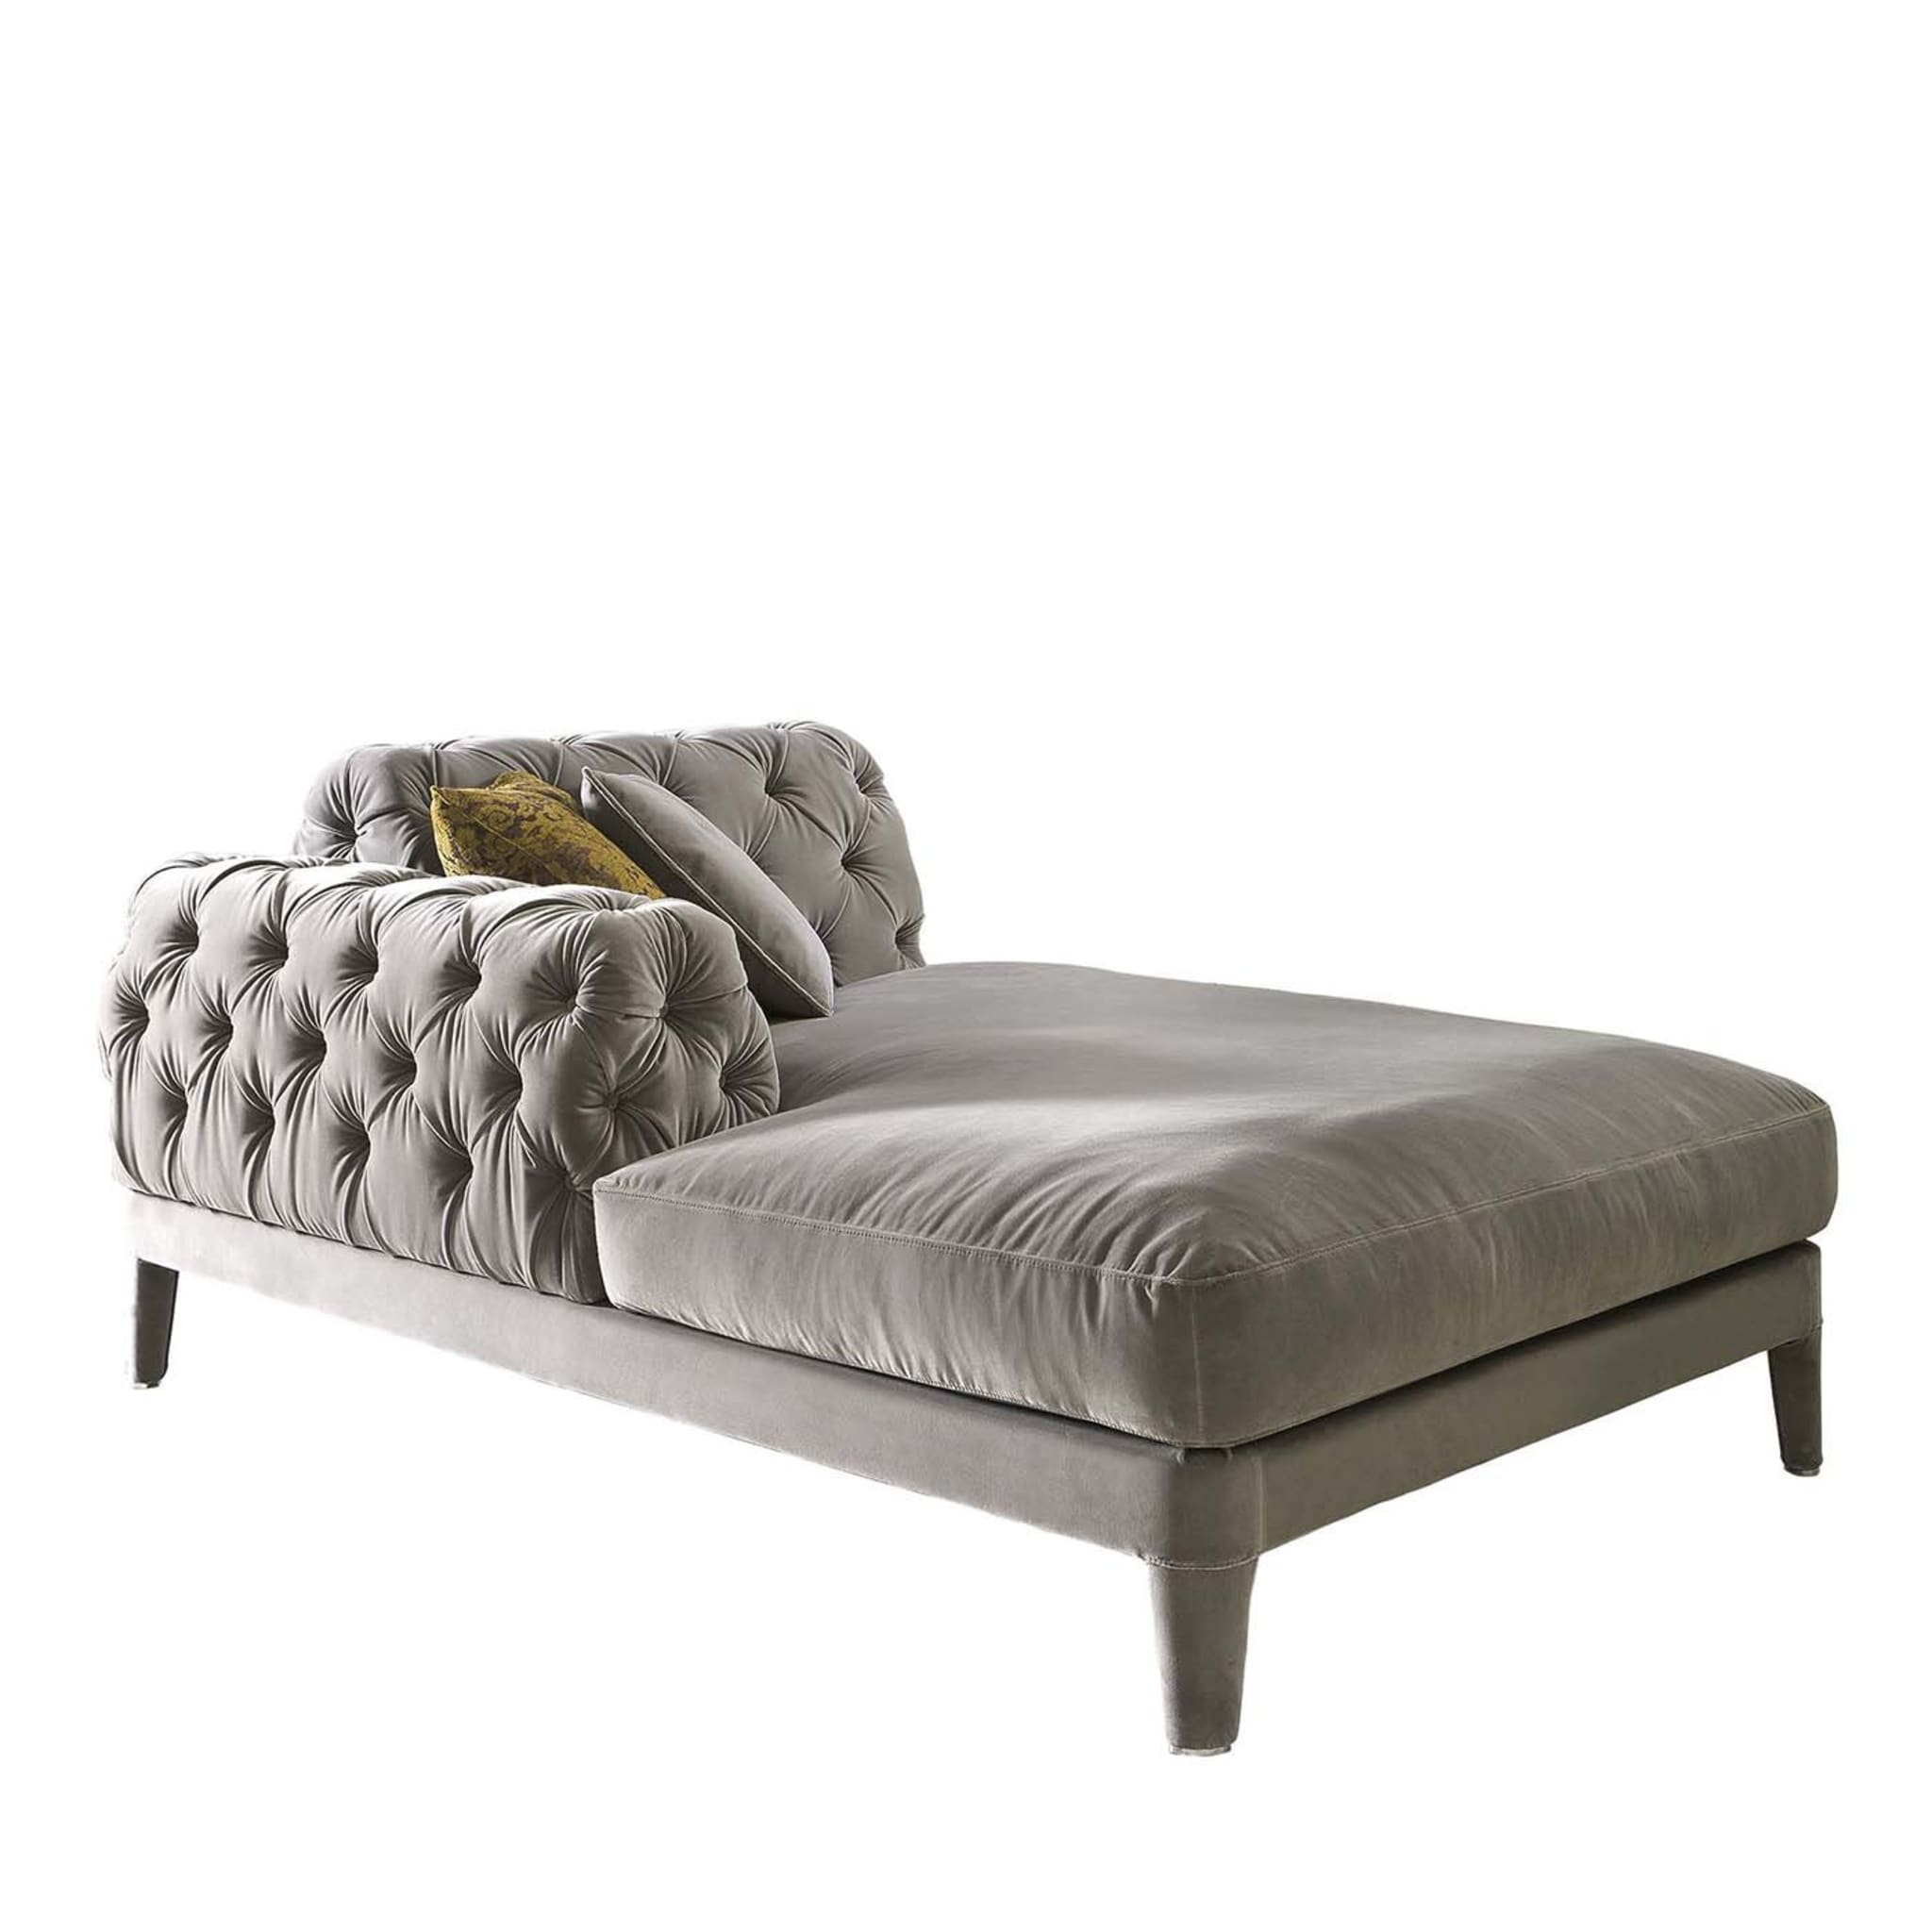 Elliot Taupe Chaise Longue - Main view